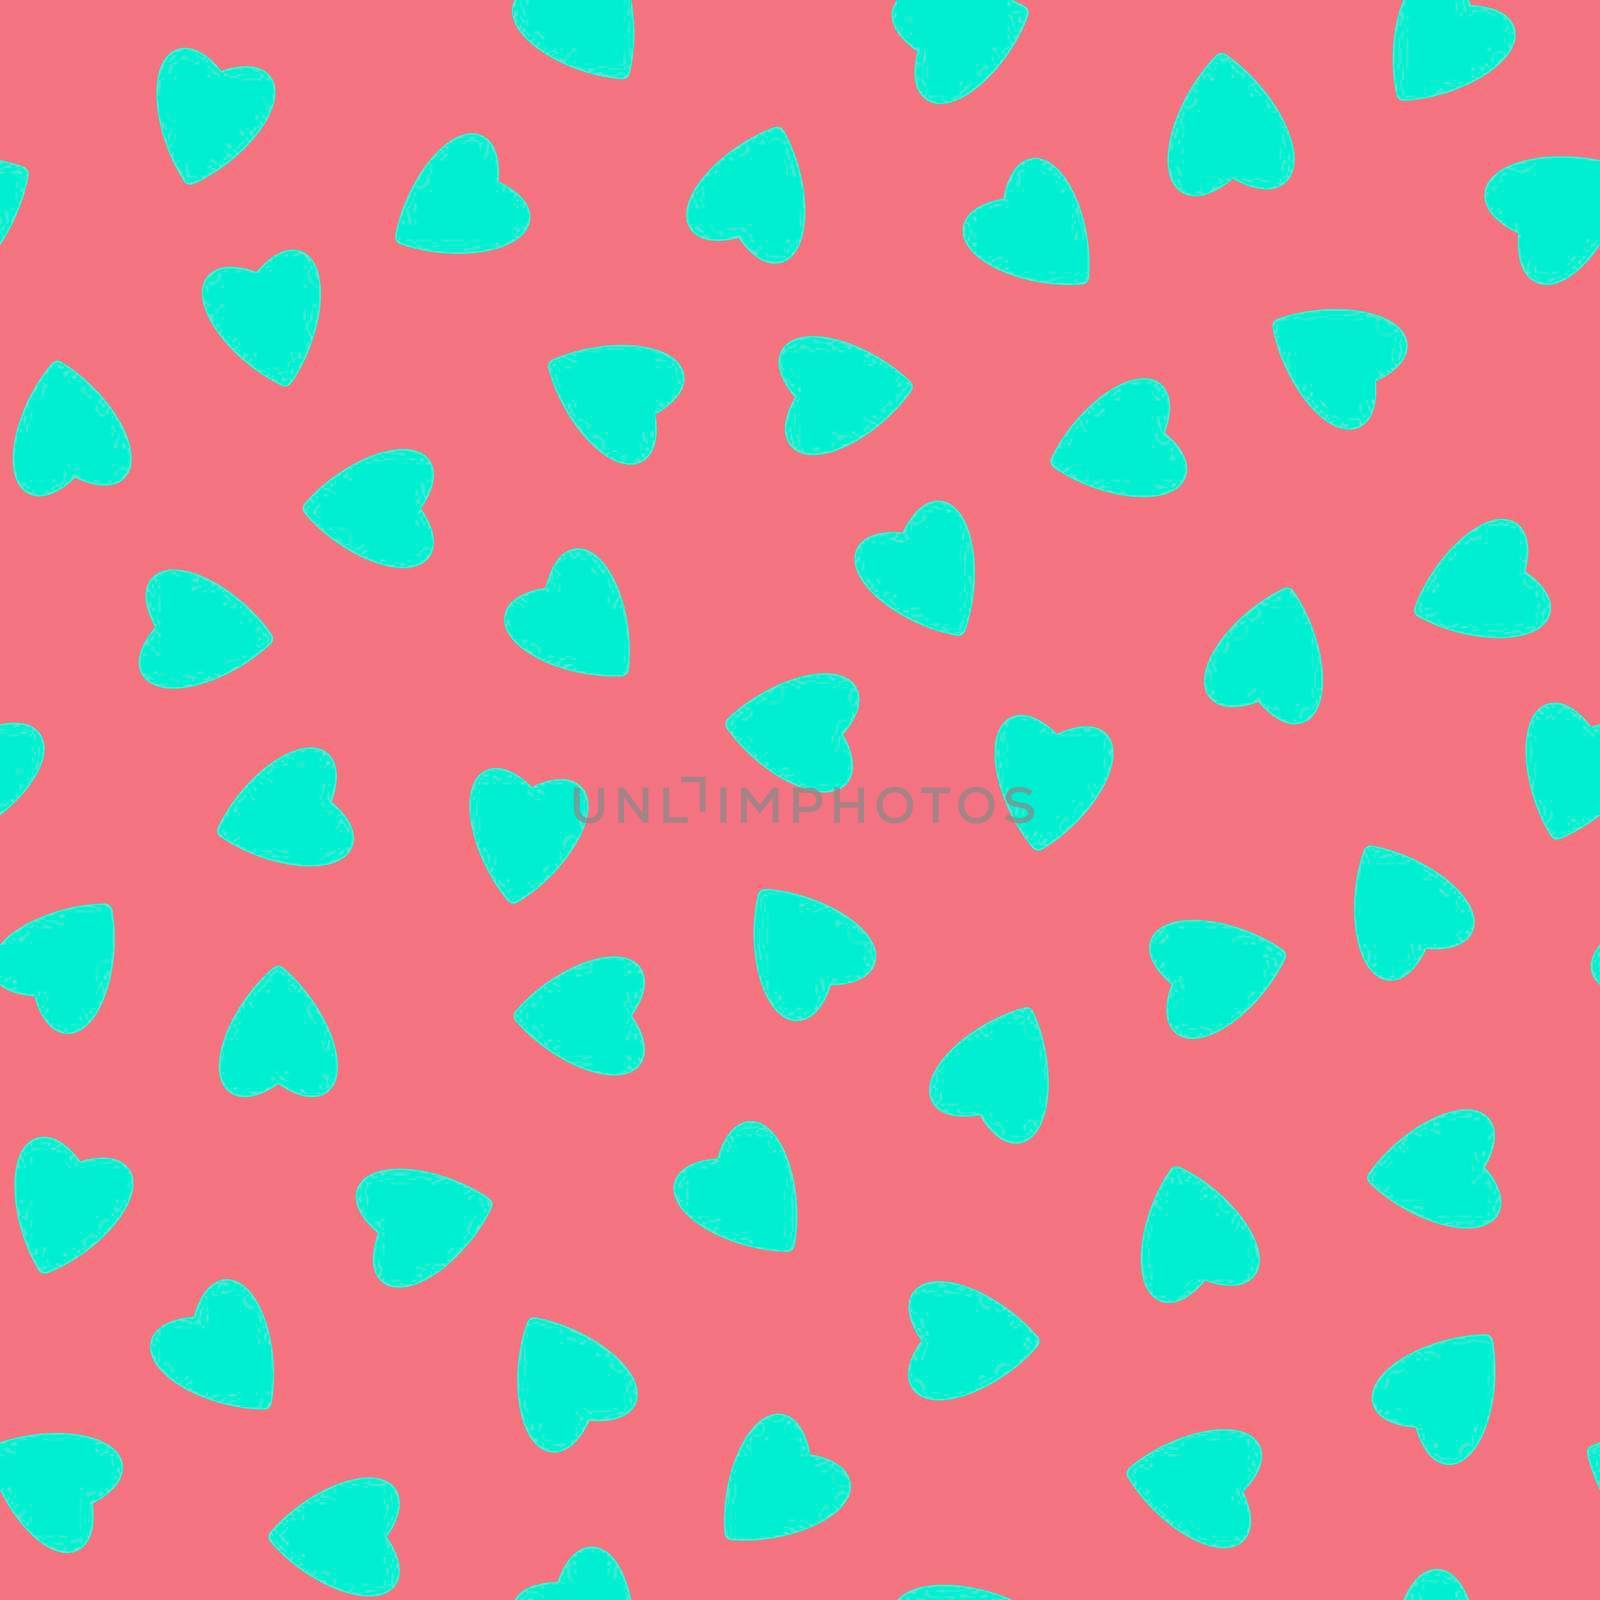 Simple hearts seamless pattern,endless chaotic texture made of tiny heart silhouettes.Valentines,mothers day background.Great for Easter,wedding,scrapbook,gift wrapping paper,textilesAzure on pink.